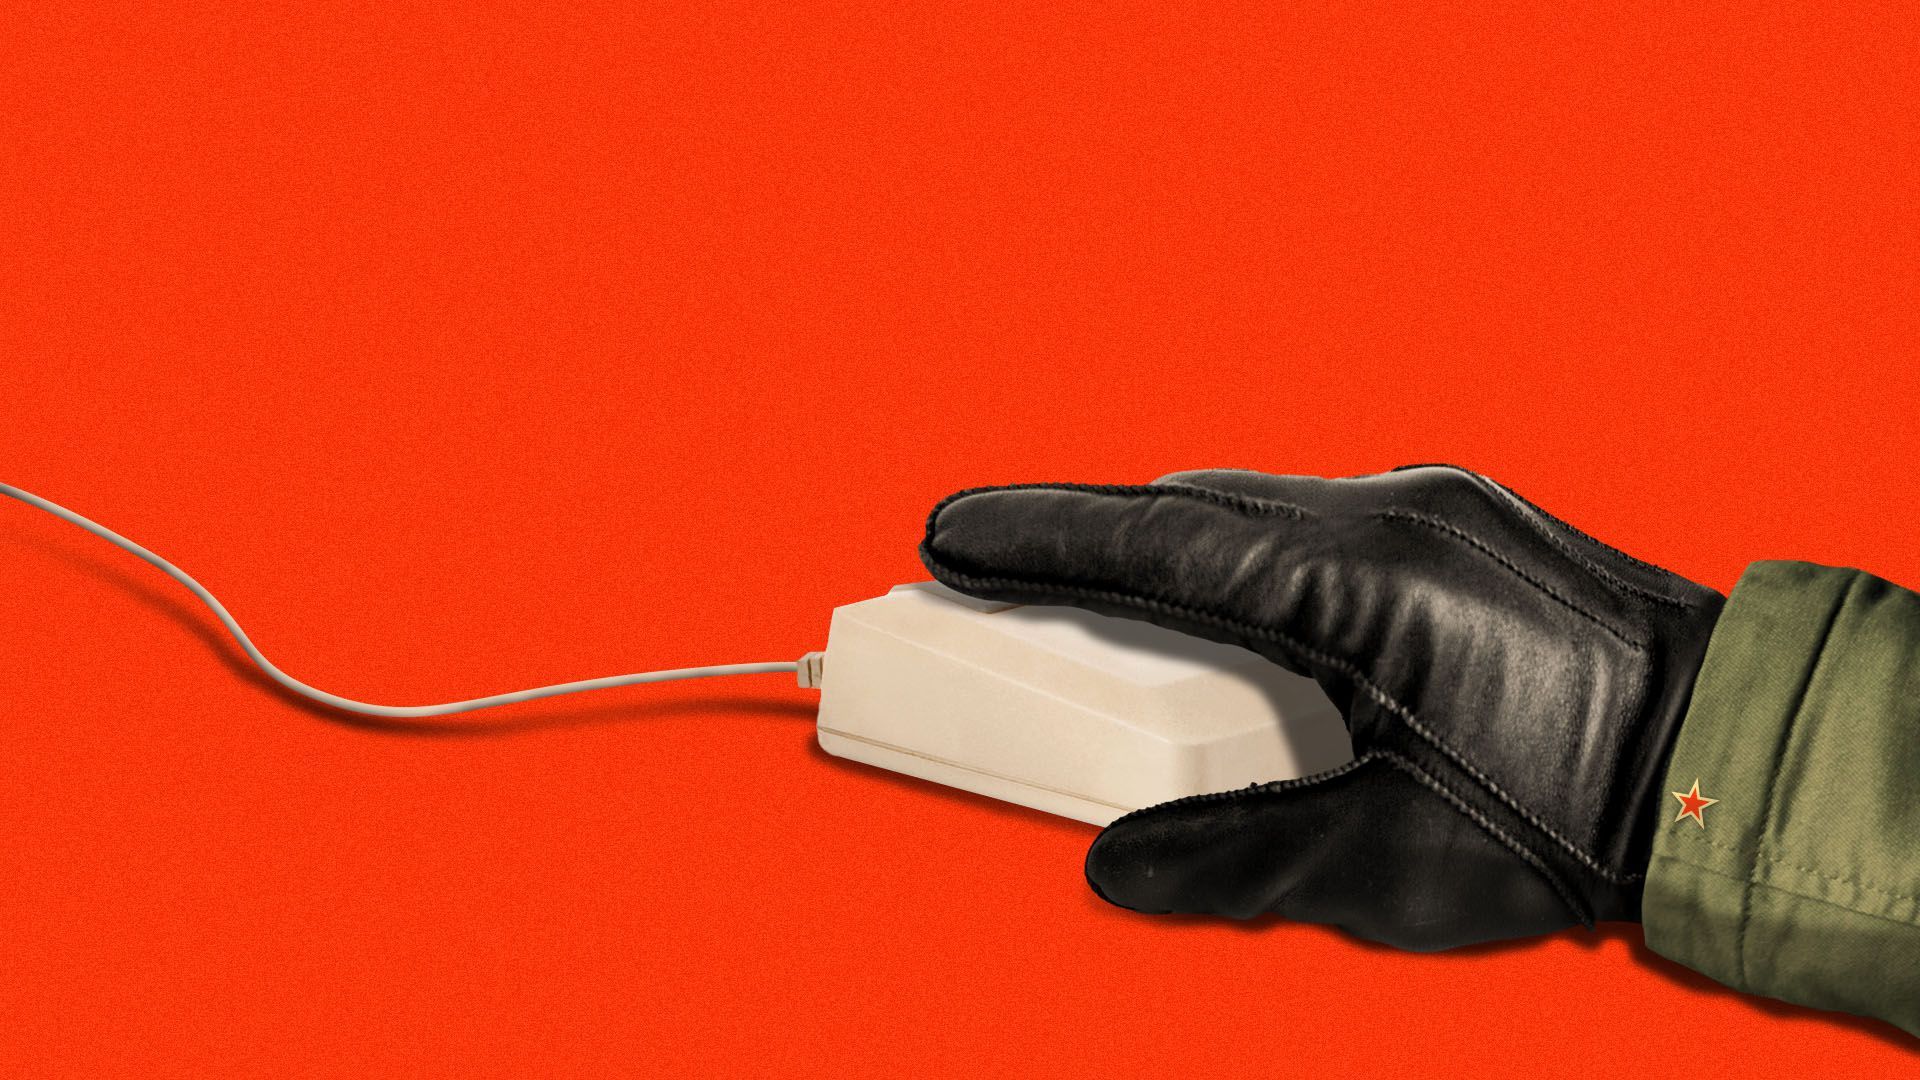 Illustration of a hand in gloves and a winter jacket on a computer mouse